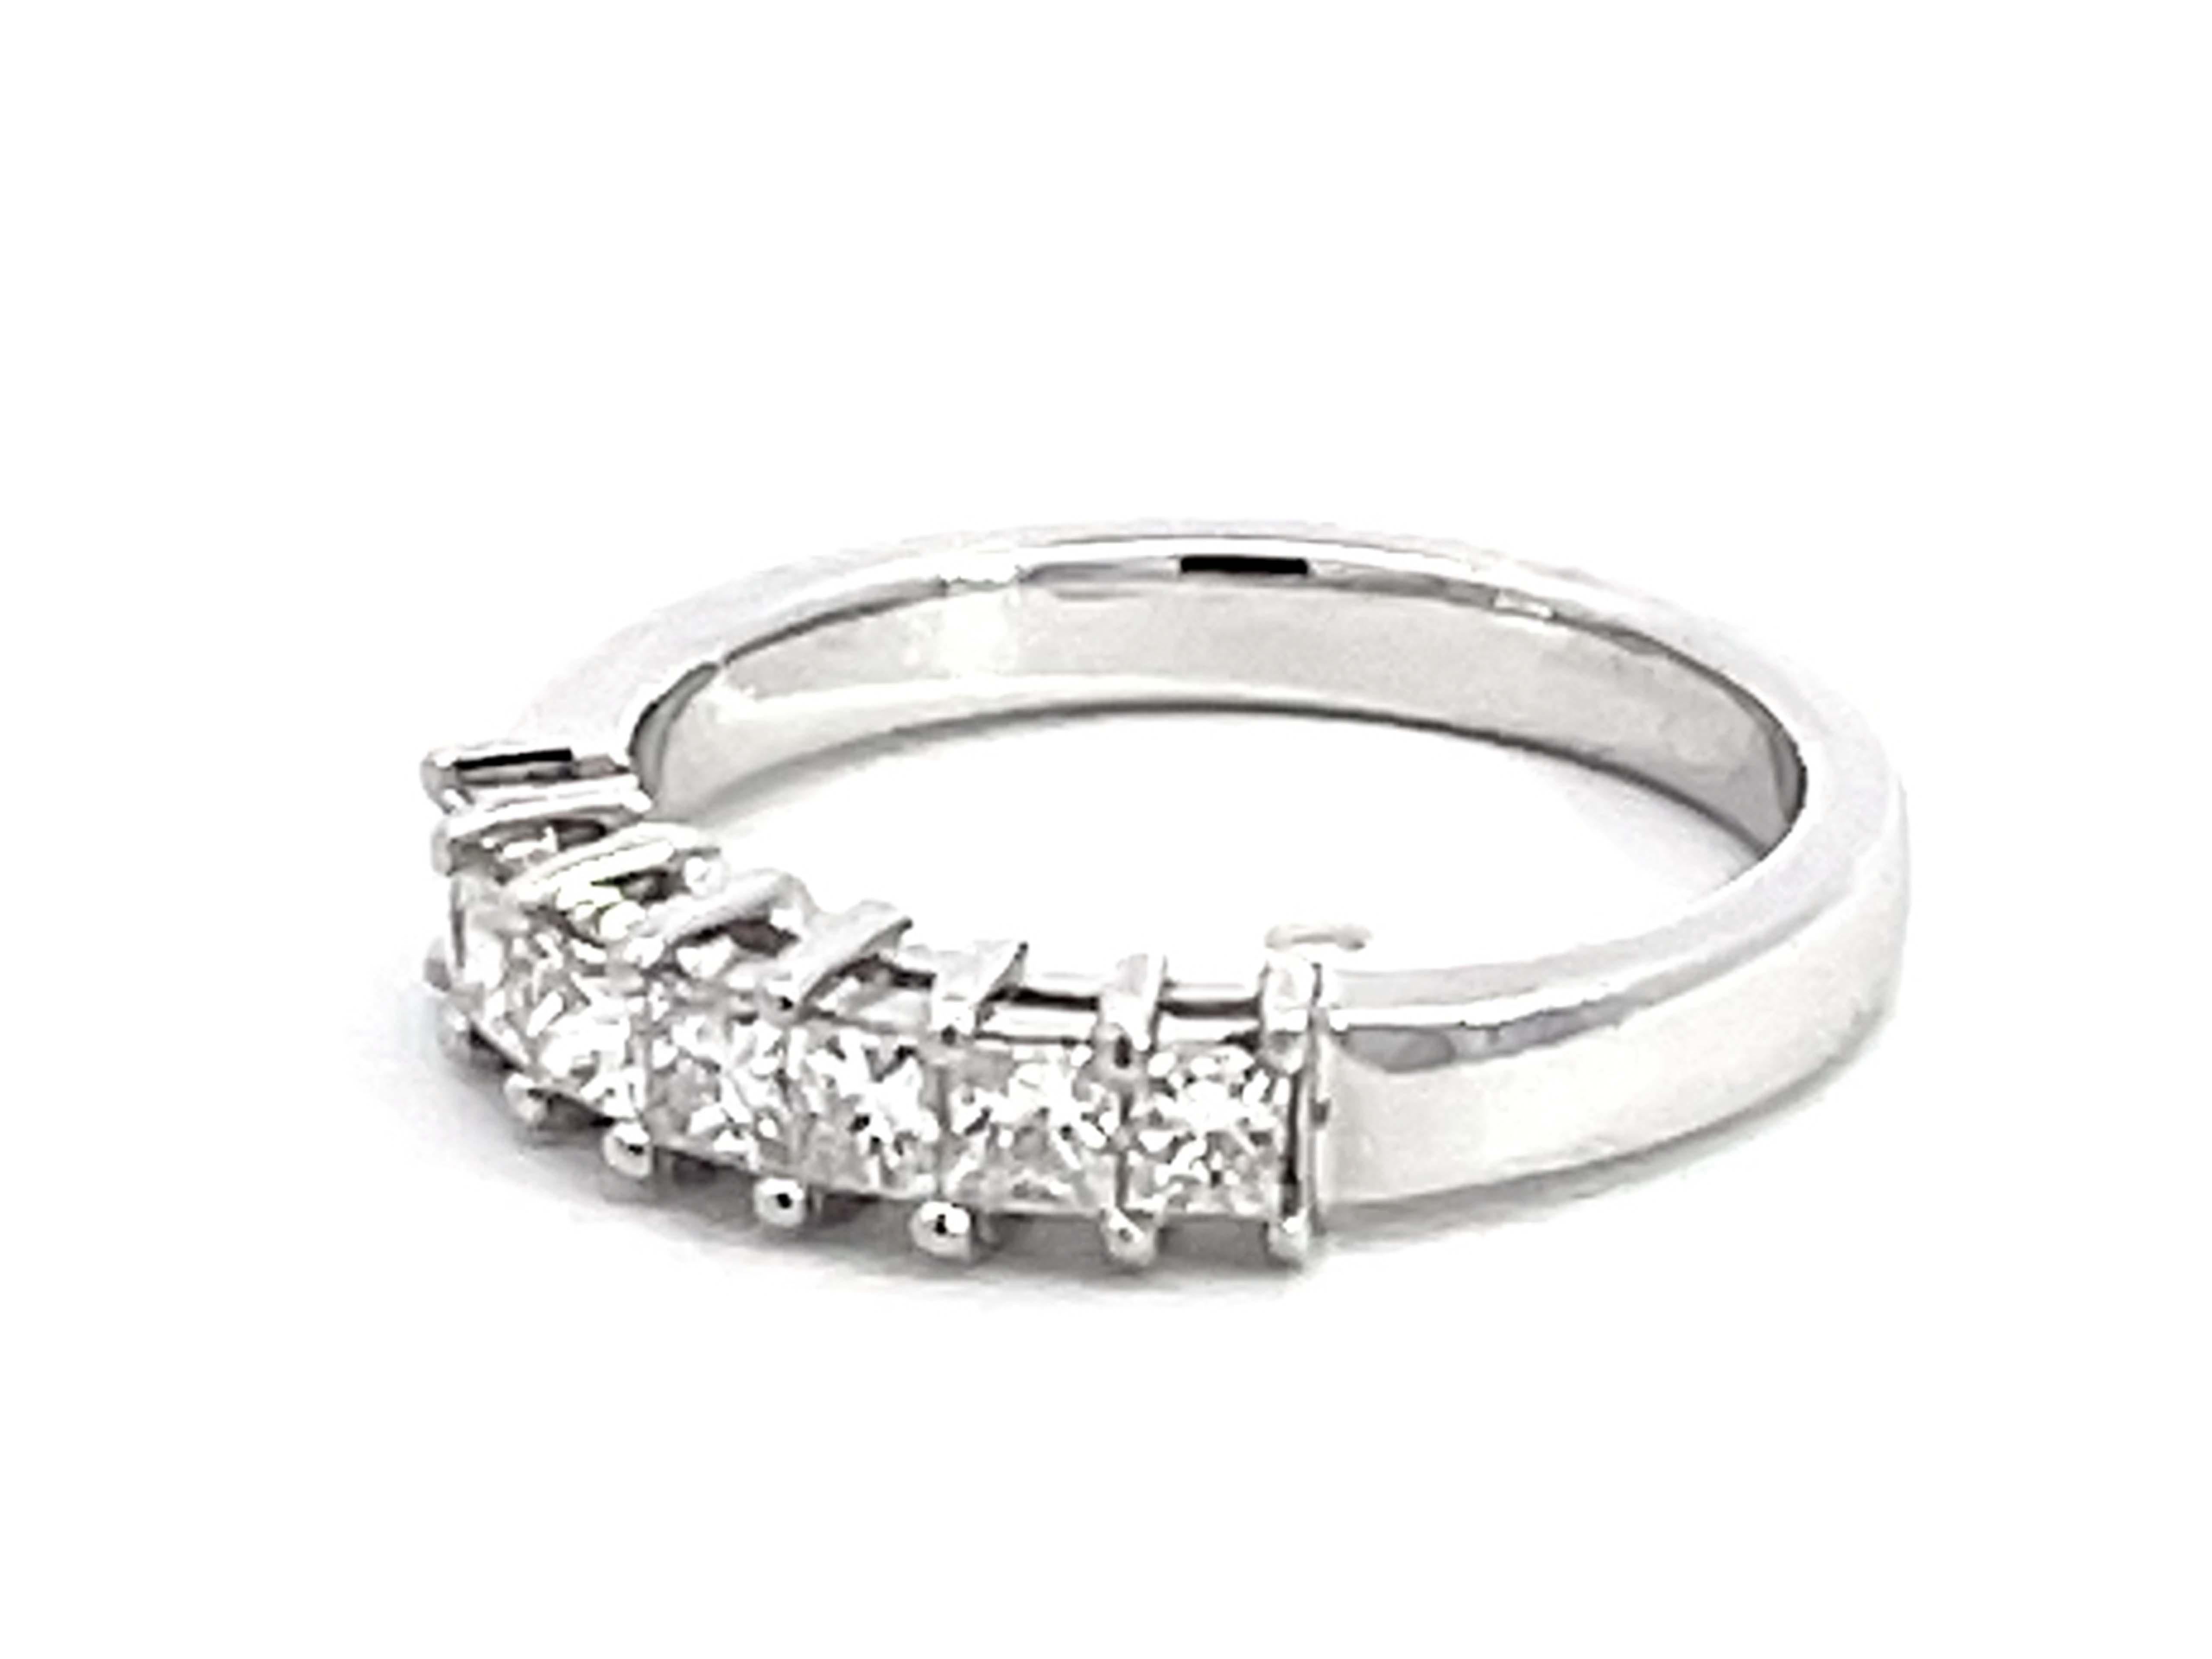 Princess Cut Prong Set Diamond Ring Solid 18k White Gold In New Condition For Sale In Honolulu, HI